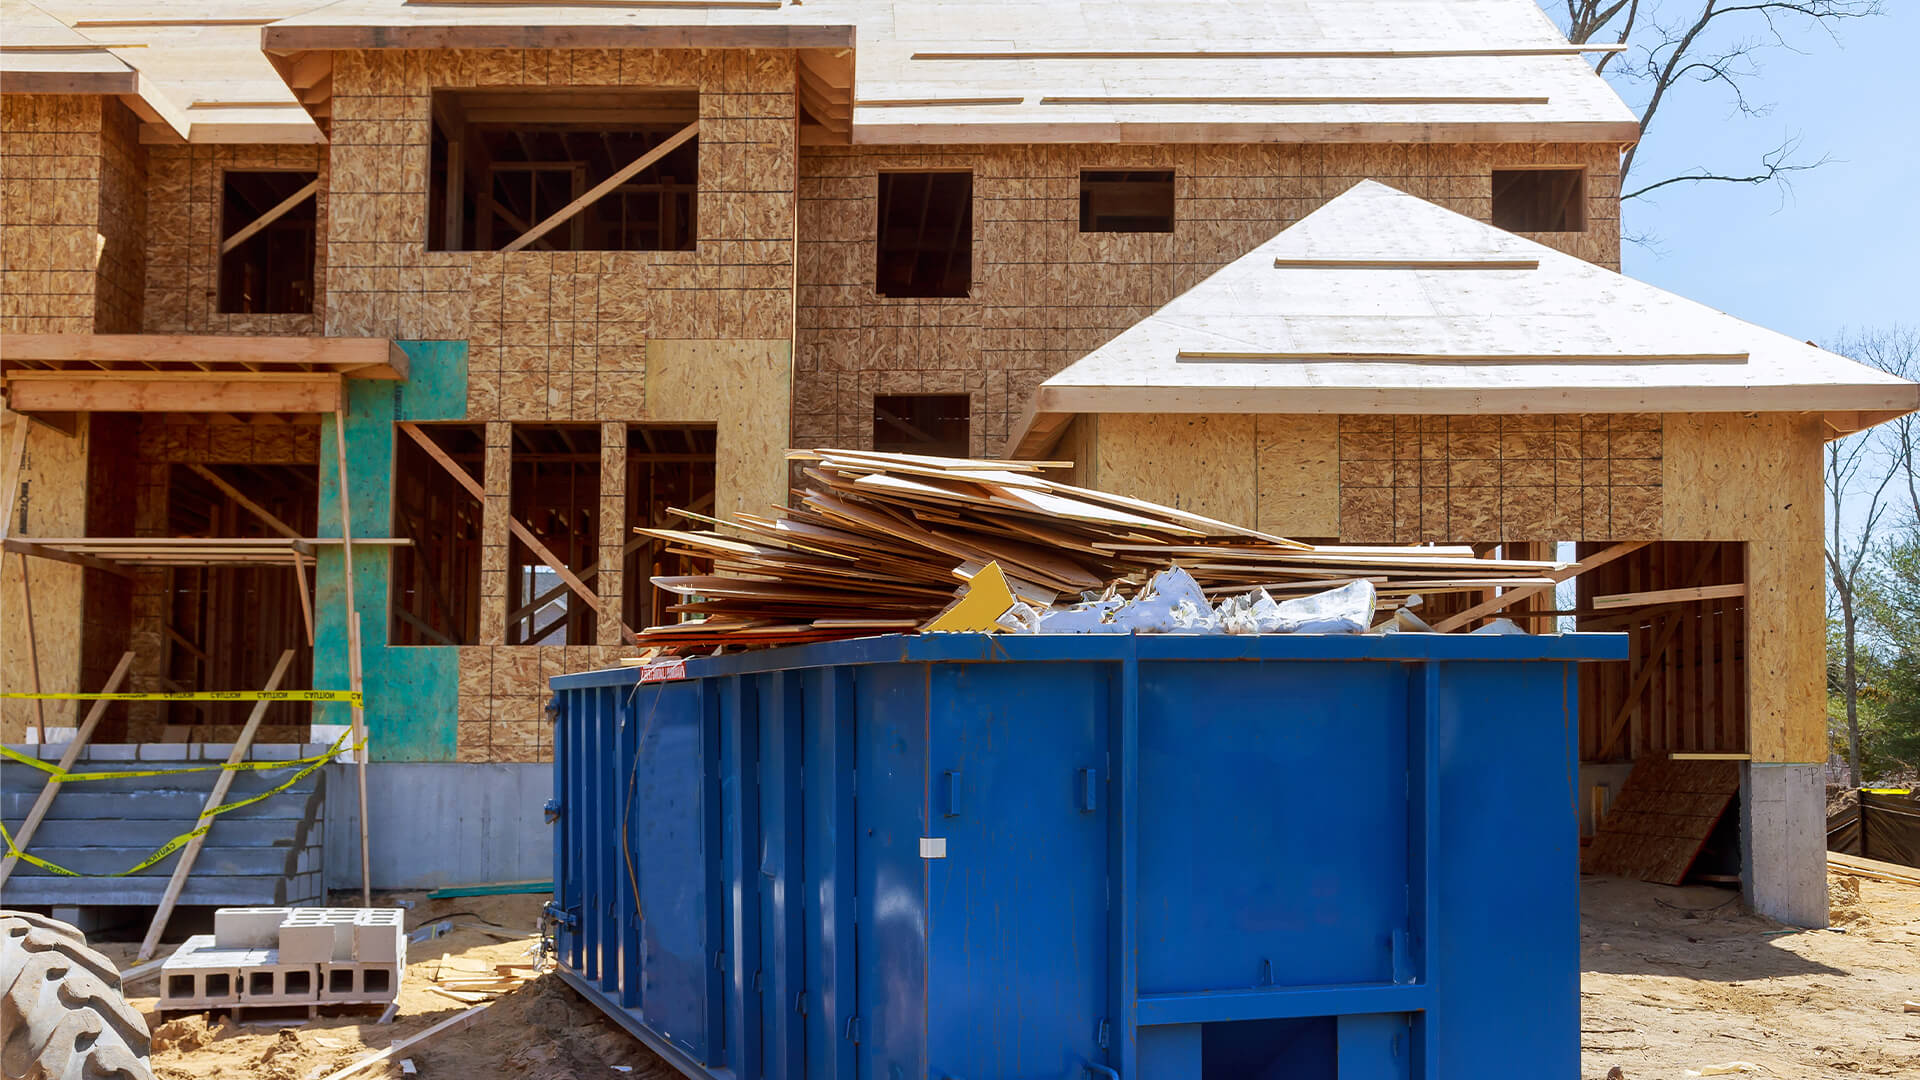 Ontario County launches recycling program for building materials